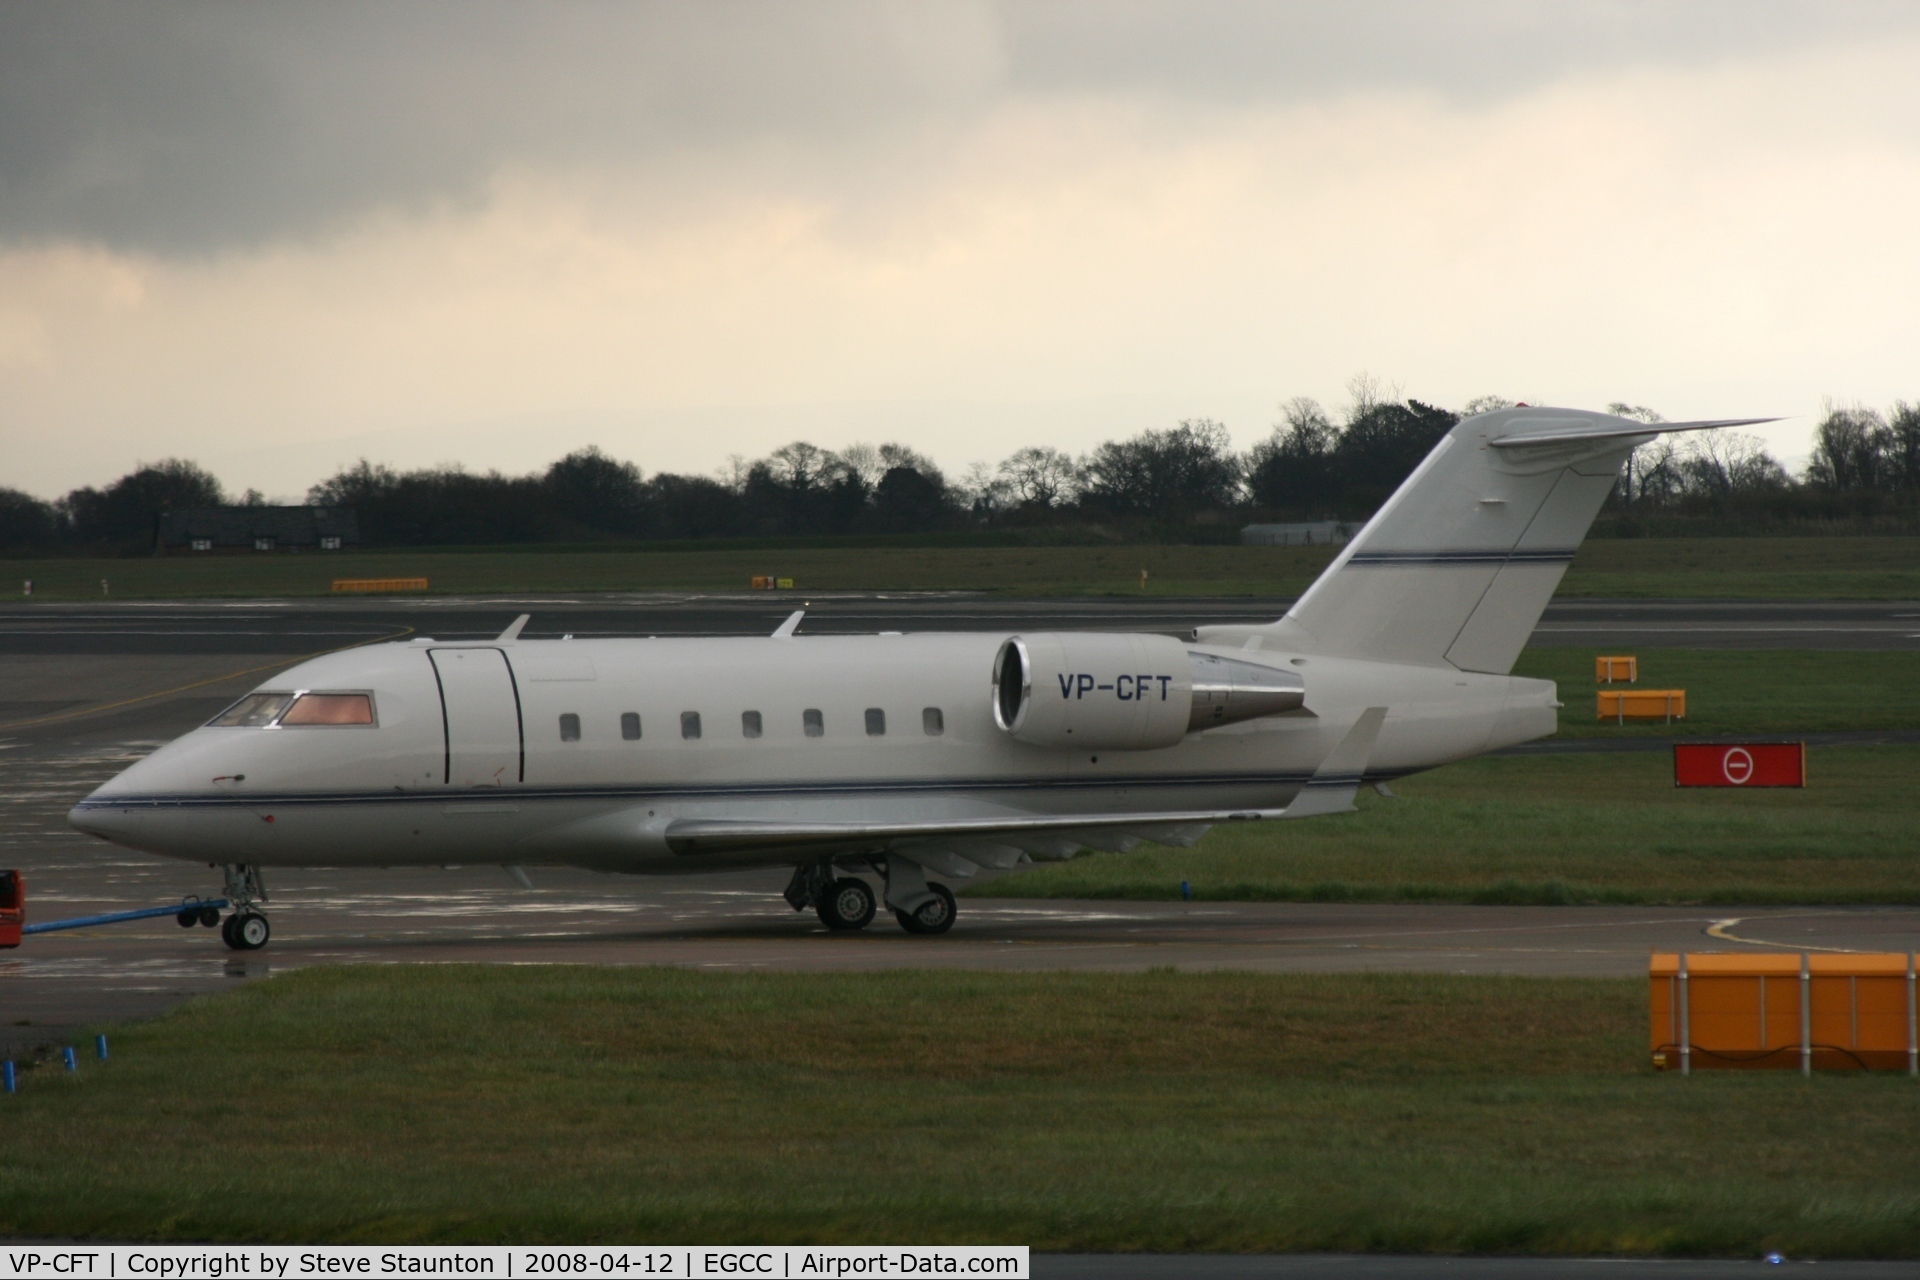 VP-CFT, 1990 Canadair Challenger 601-3A (CL-600-2B16) C/N 5067, Taken at Manchester Airport on a typical showery April day